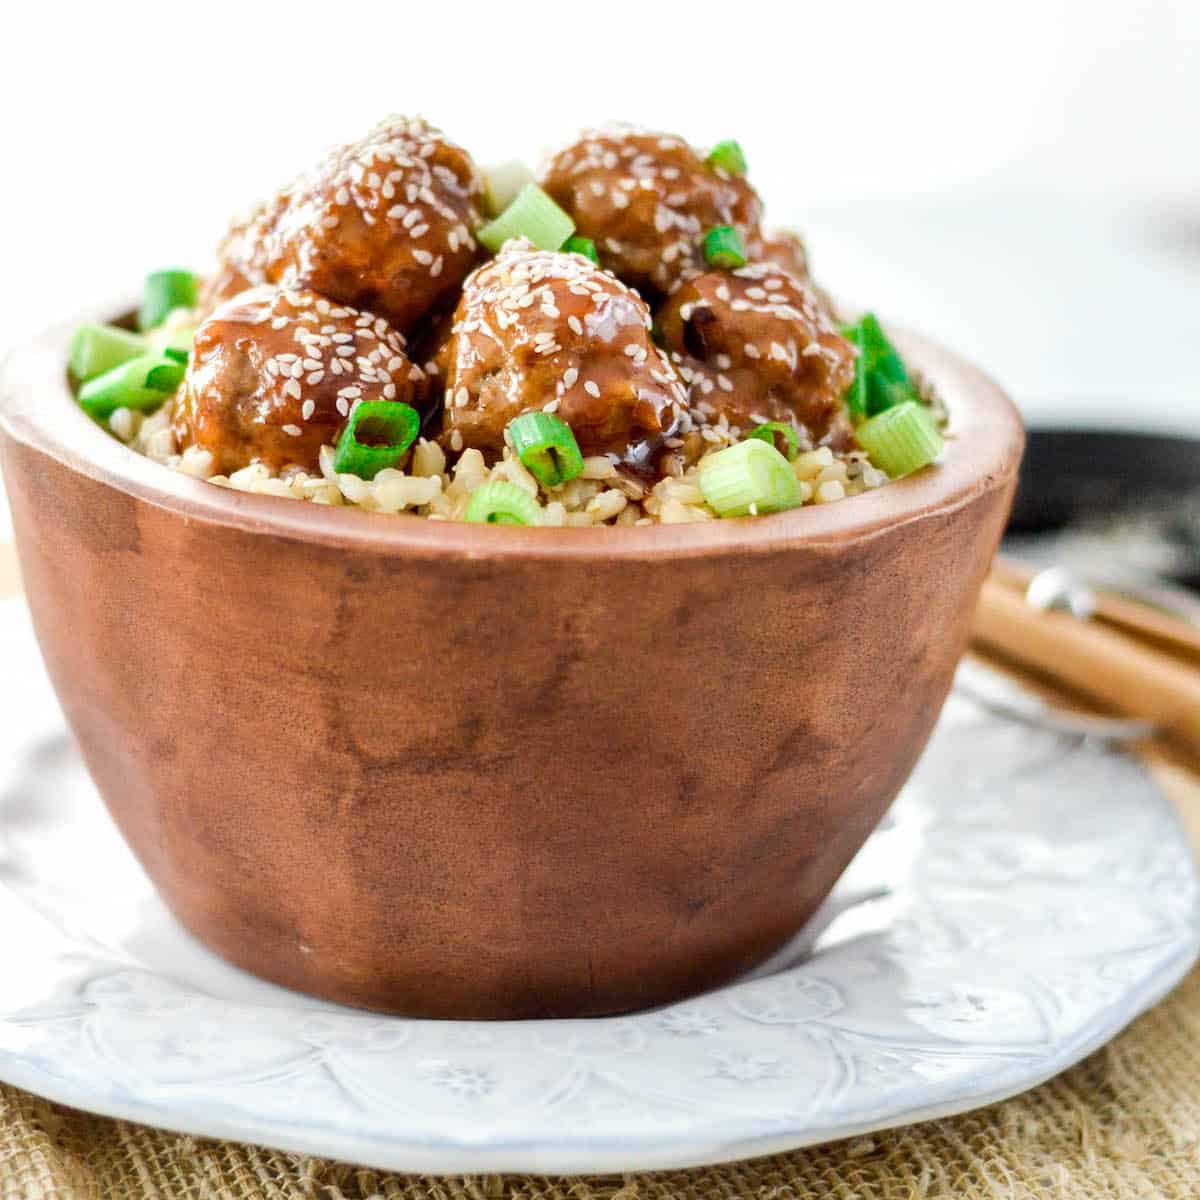 Front view of healthy Paleo Sweet and Sour Meatballs in a bowl with brown rice